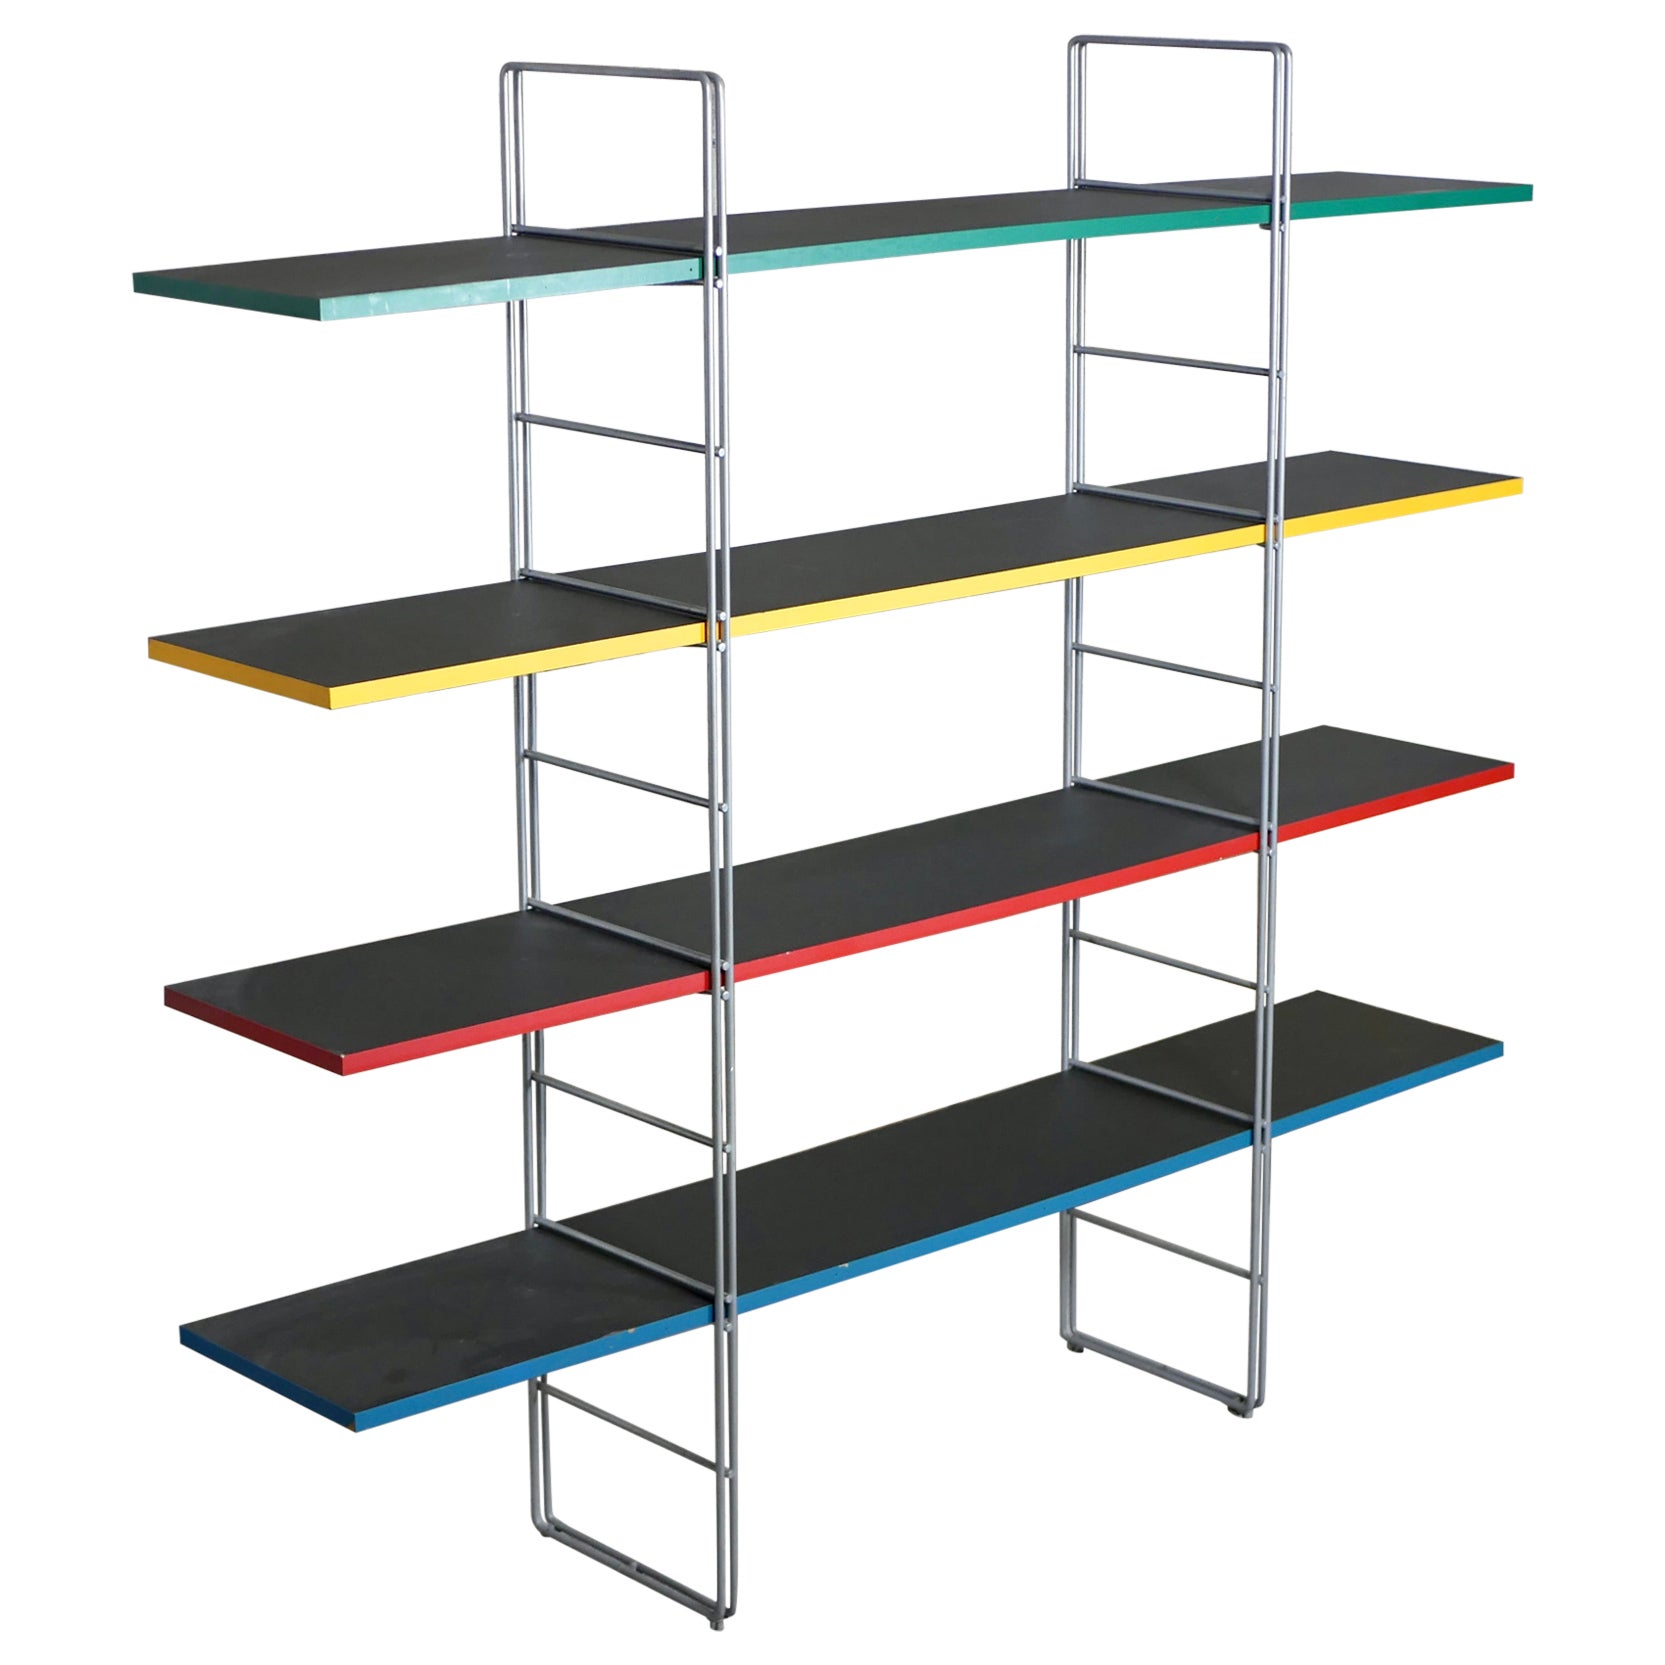 Multicolored "Guide" shelving unit by Niels Gammelgaard for Ikea, Sweden, 1985